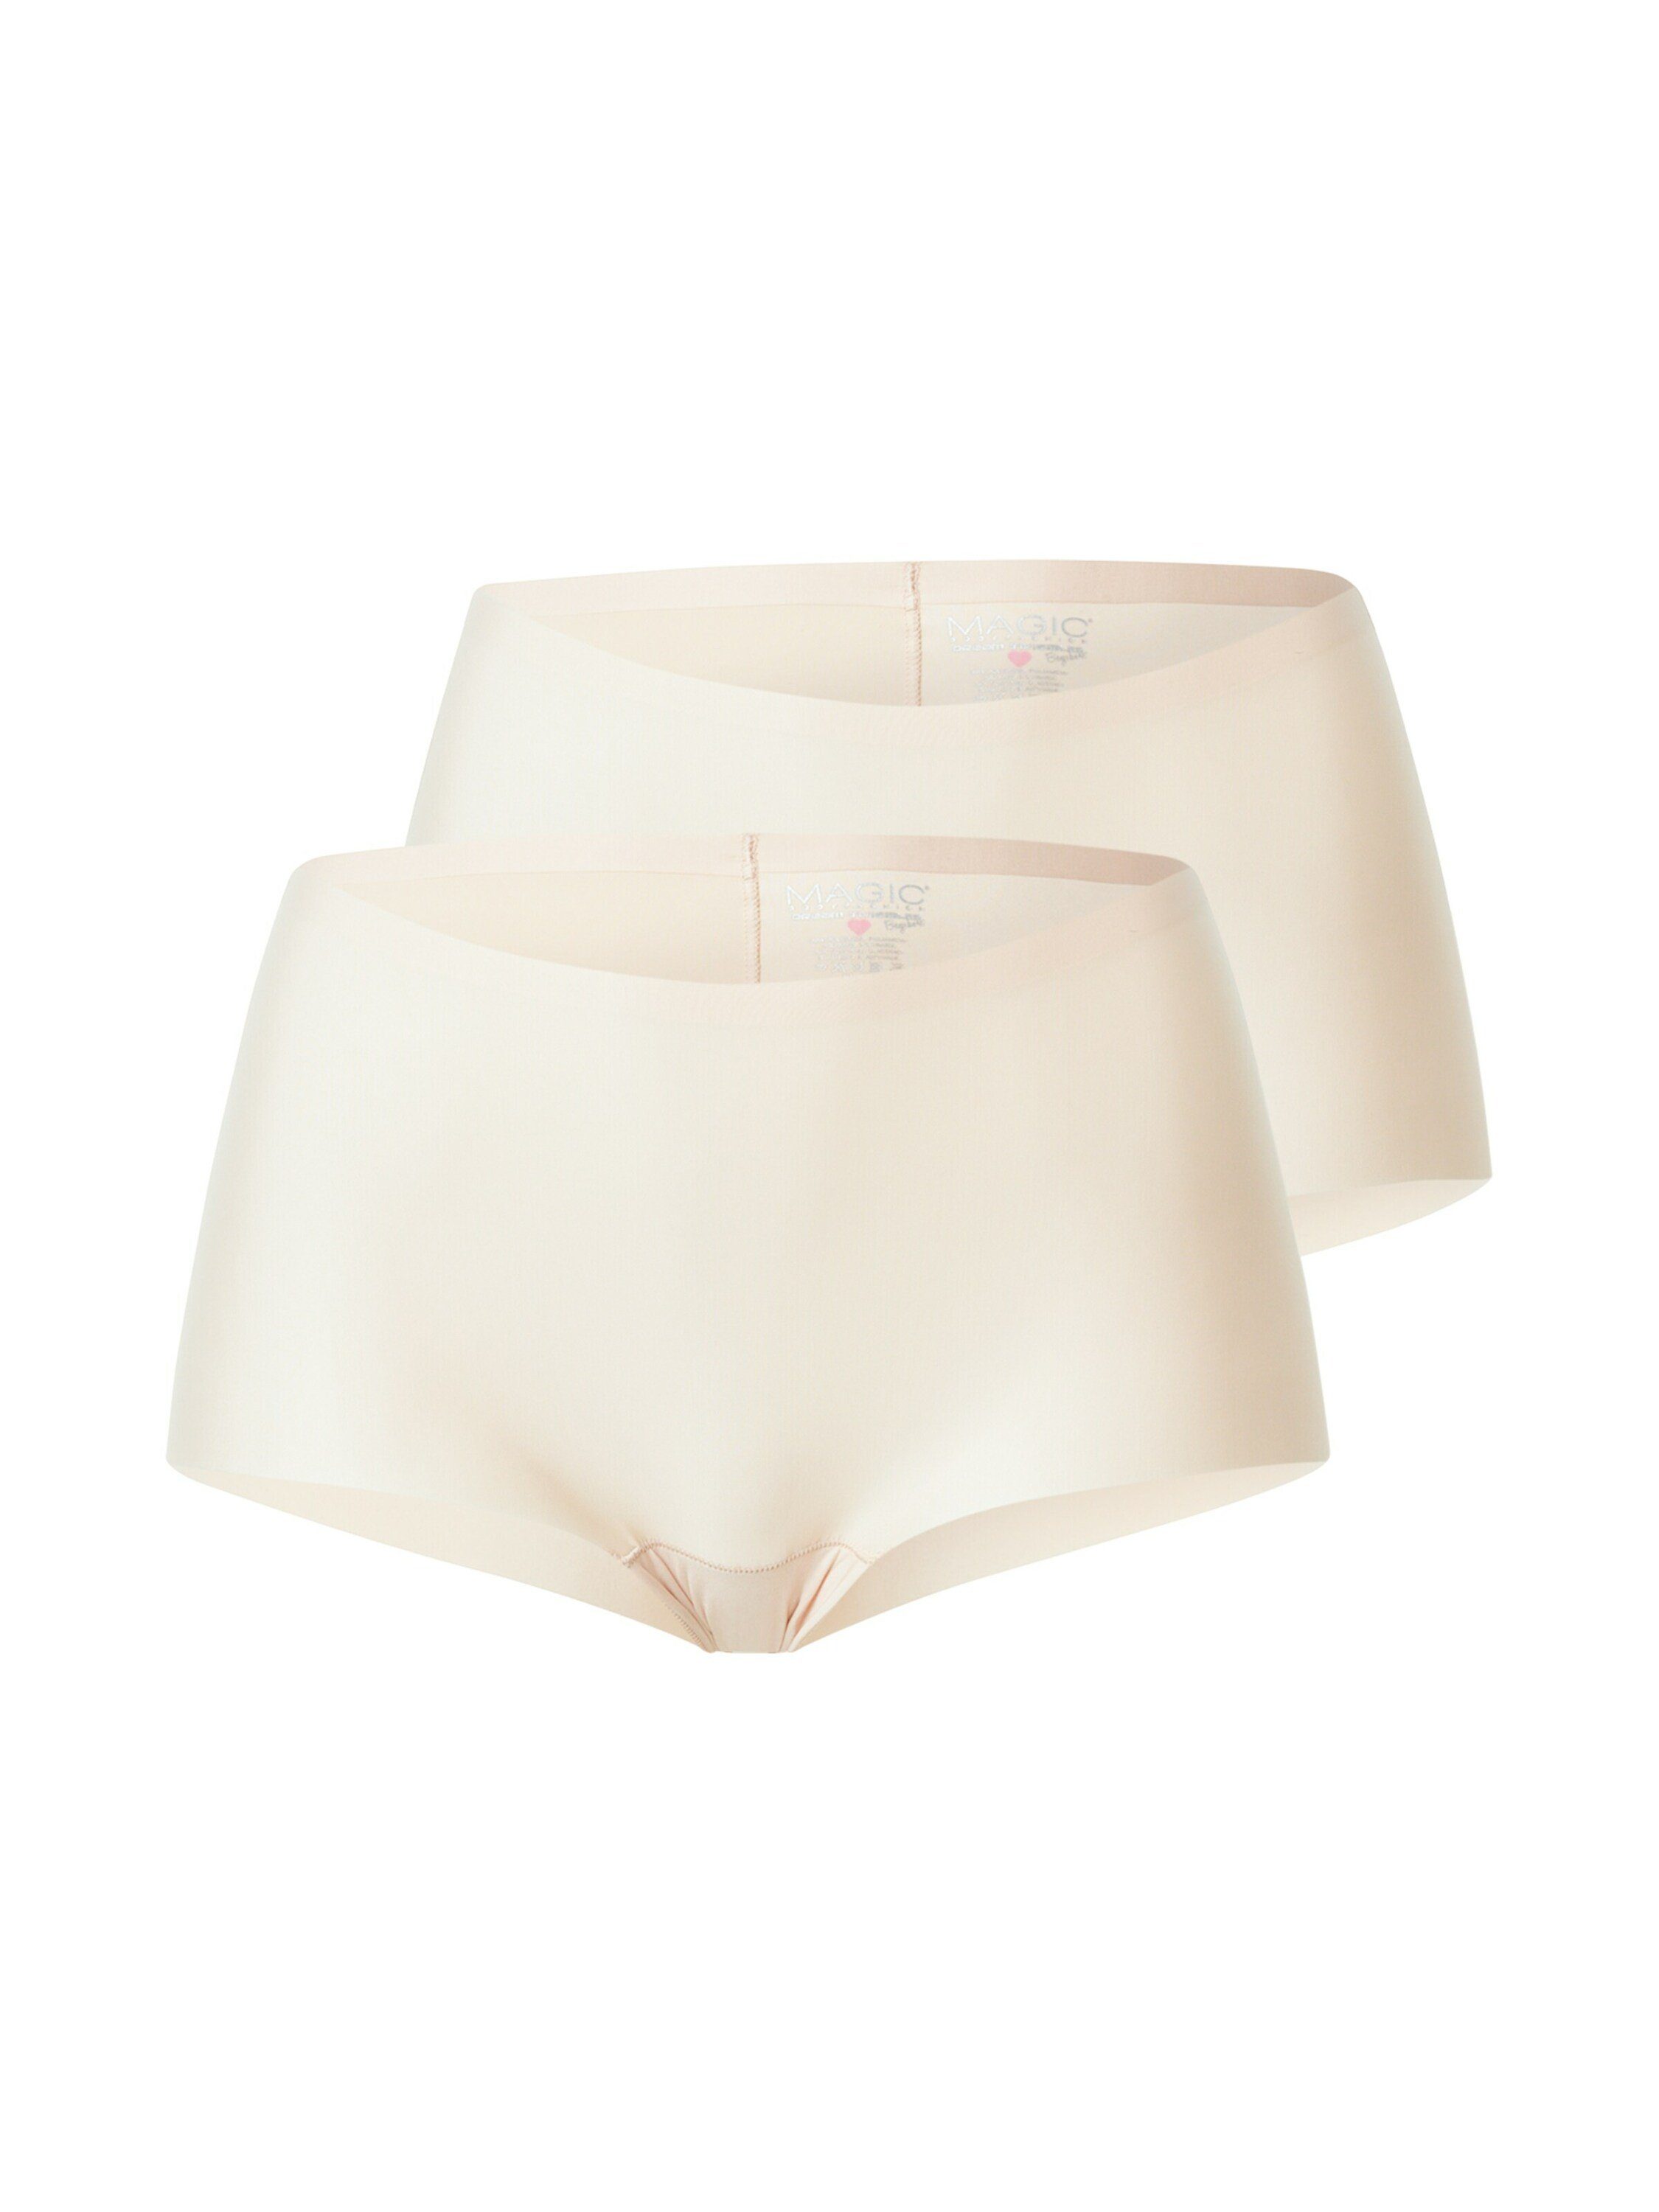 MAGIC Bodyfashion Panty Dream Invisibles (2-St) Weiteres Detail